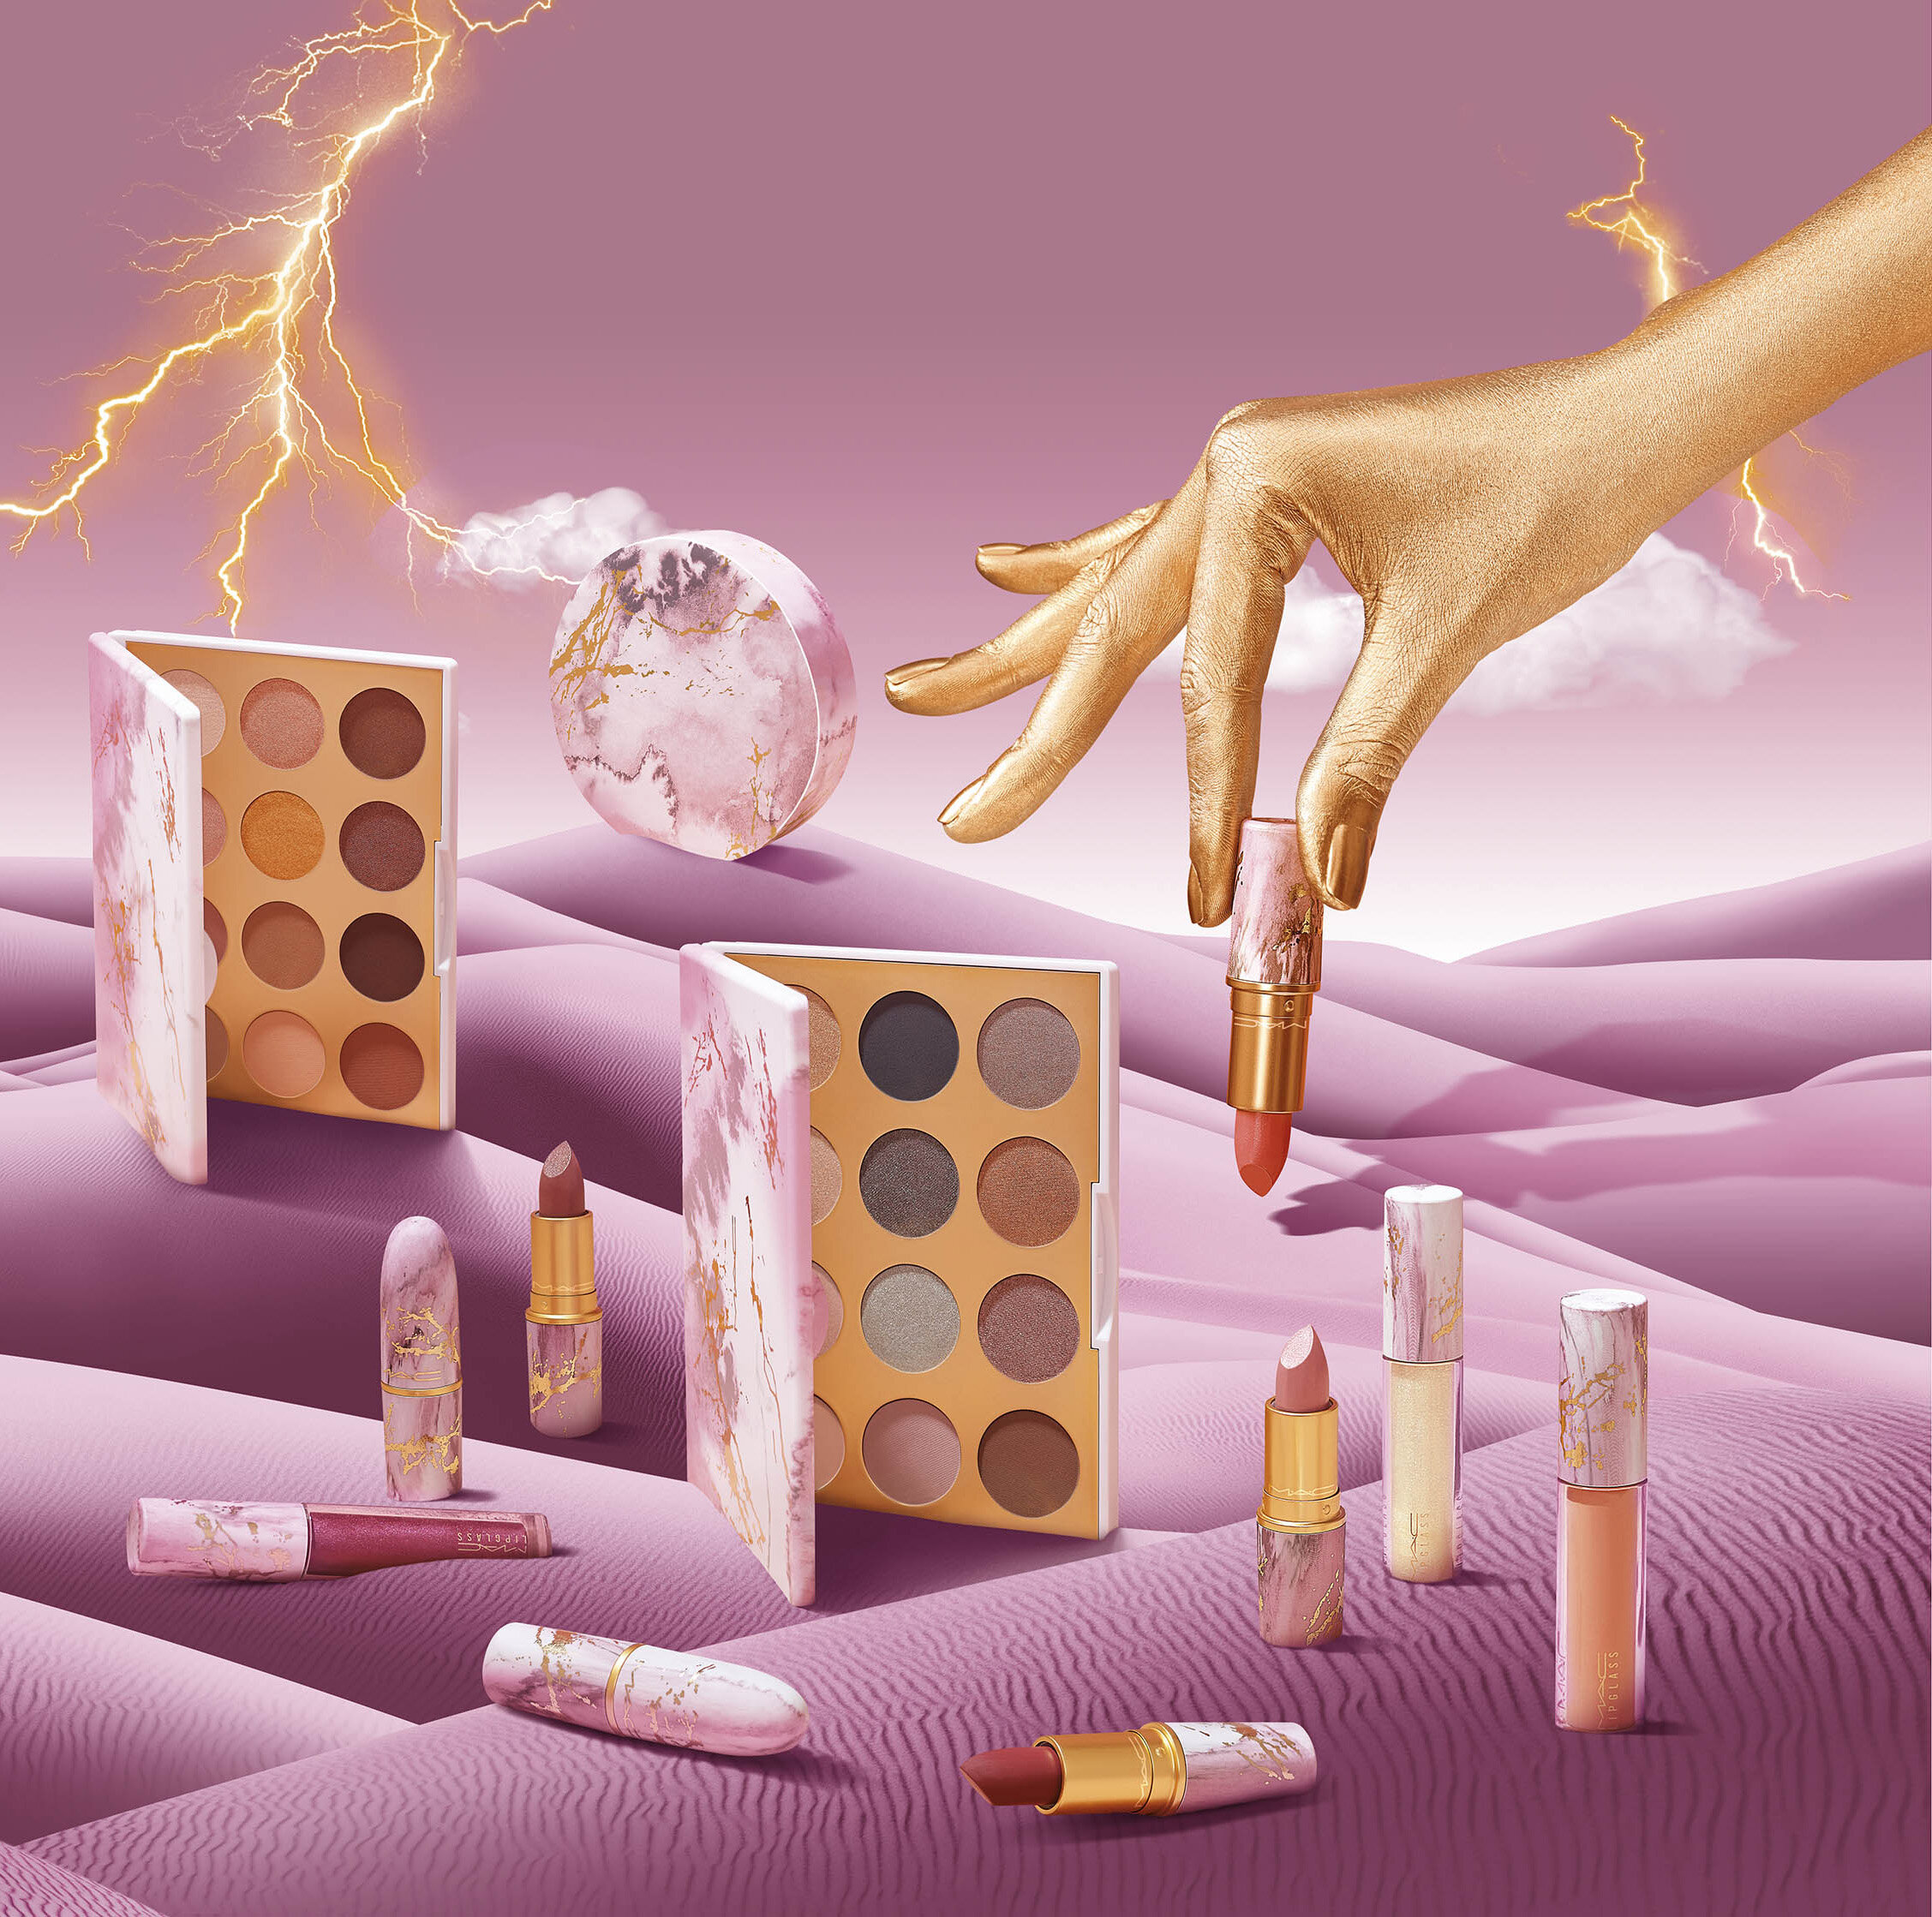  Visual Concept / Art Direction for MAC, assisting Micol Talso at  TOILETPAPER  / Photography: Pierpaolo Ferrari 